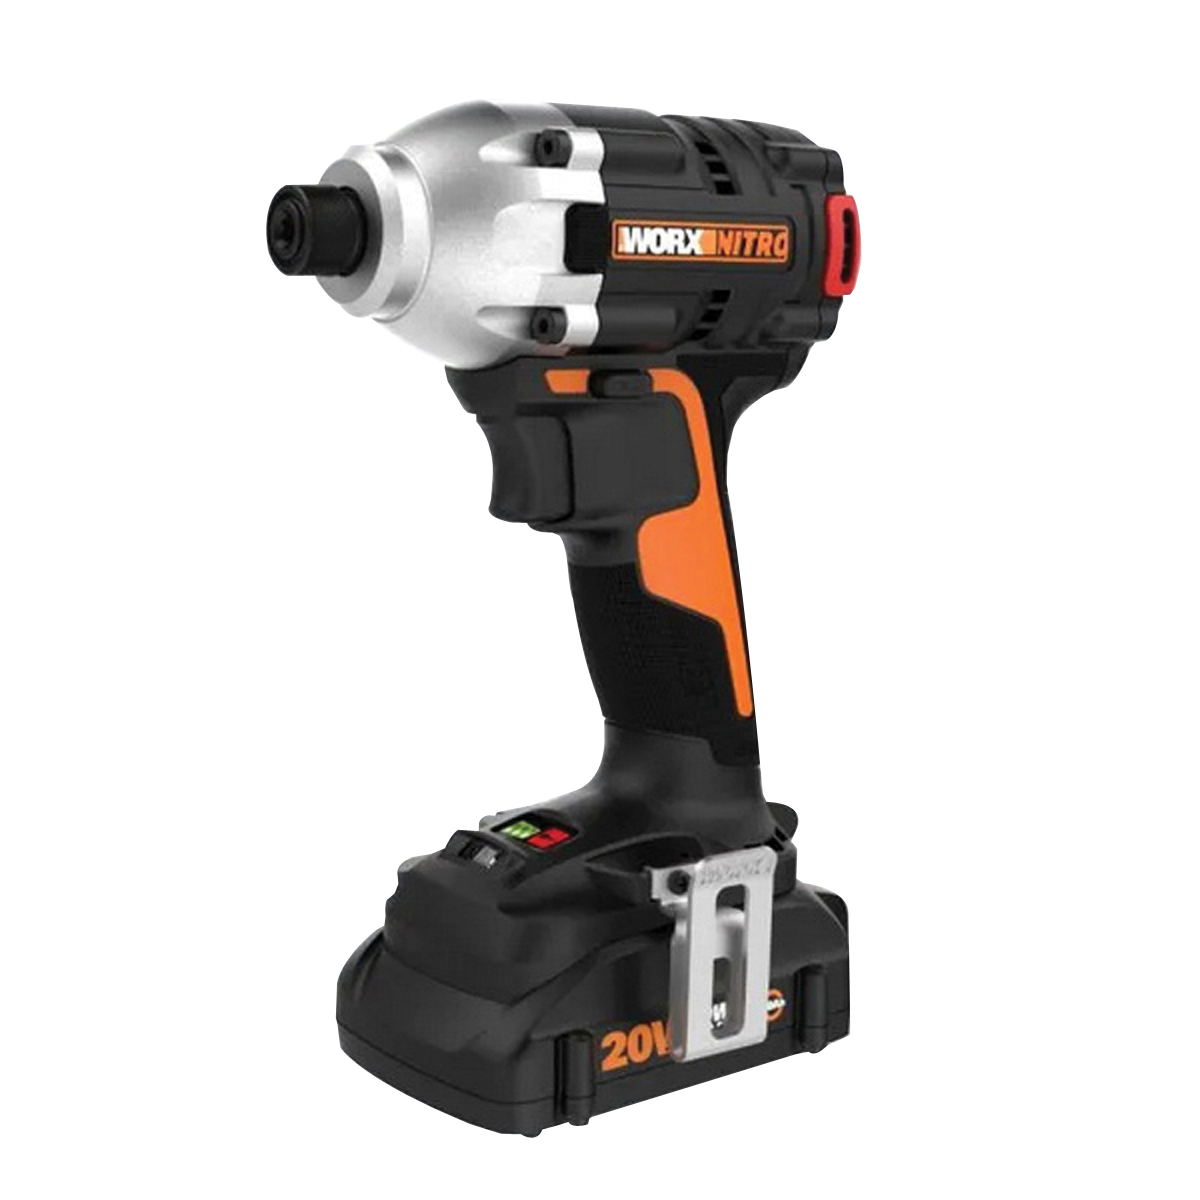 WX261L Cordless Impact Driver with Brushless Motor, Battery Included, 20 V, 2 Ah, 1/4 in Drive, 4000 bpm IPM